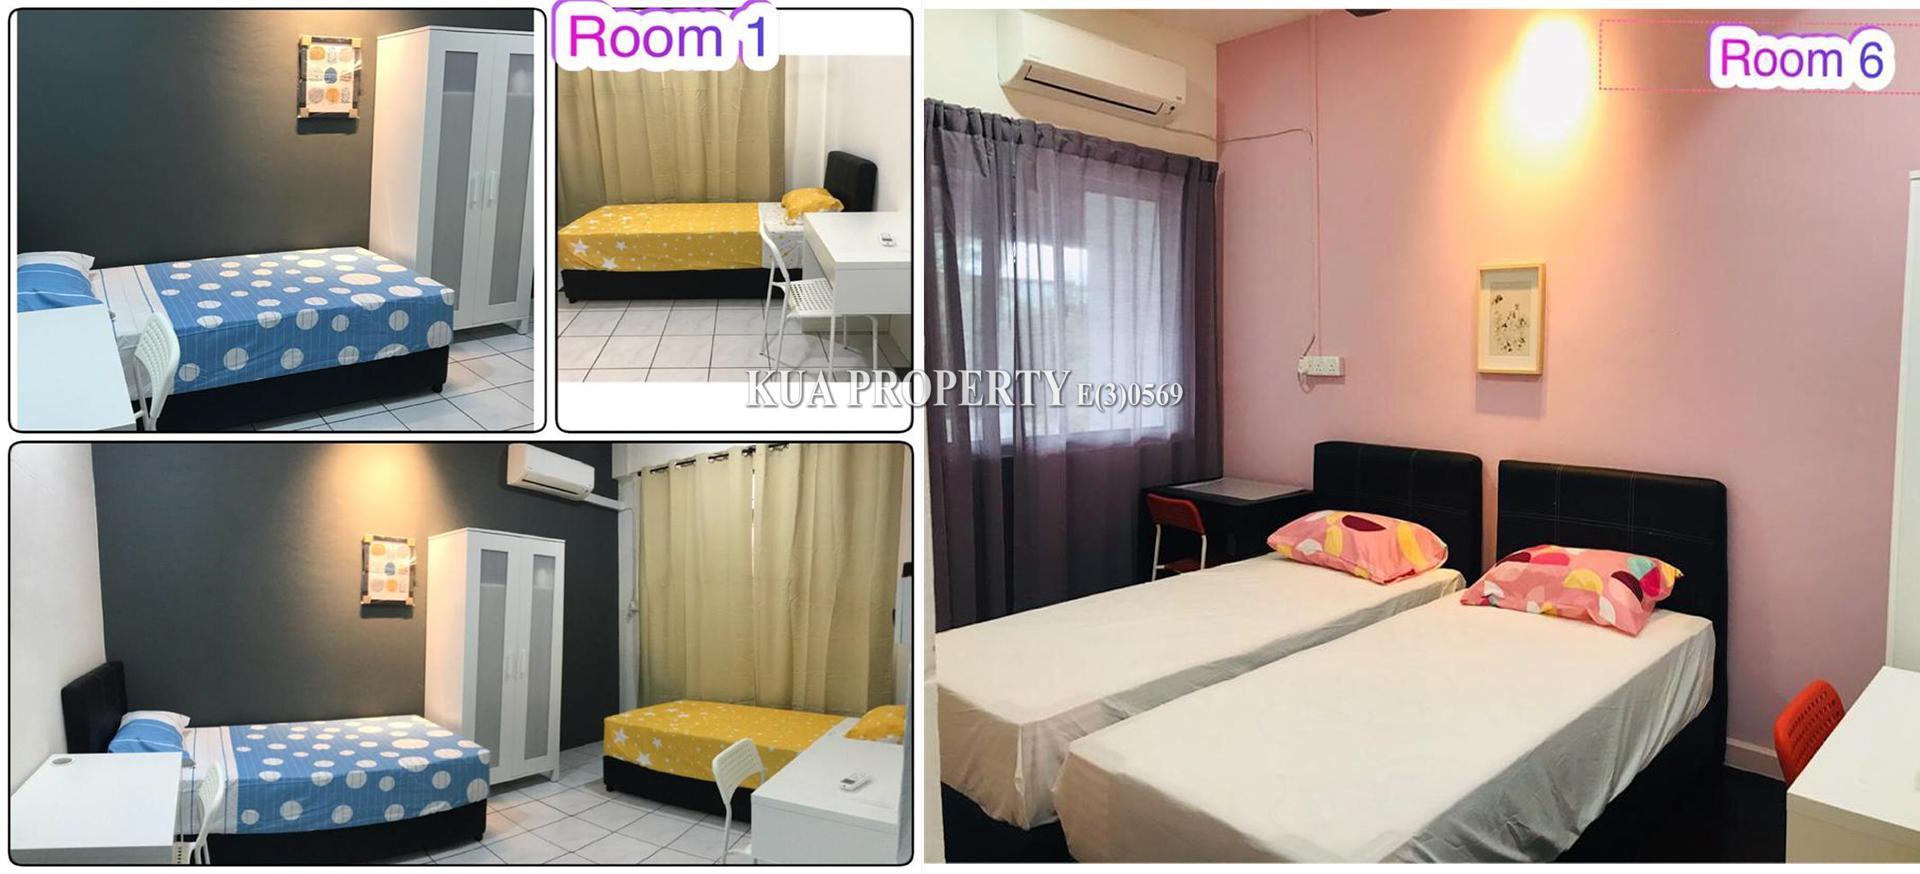 Room For Rent at Swee Joo Park(Also know as Jalan Sungai Maong Baharu)